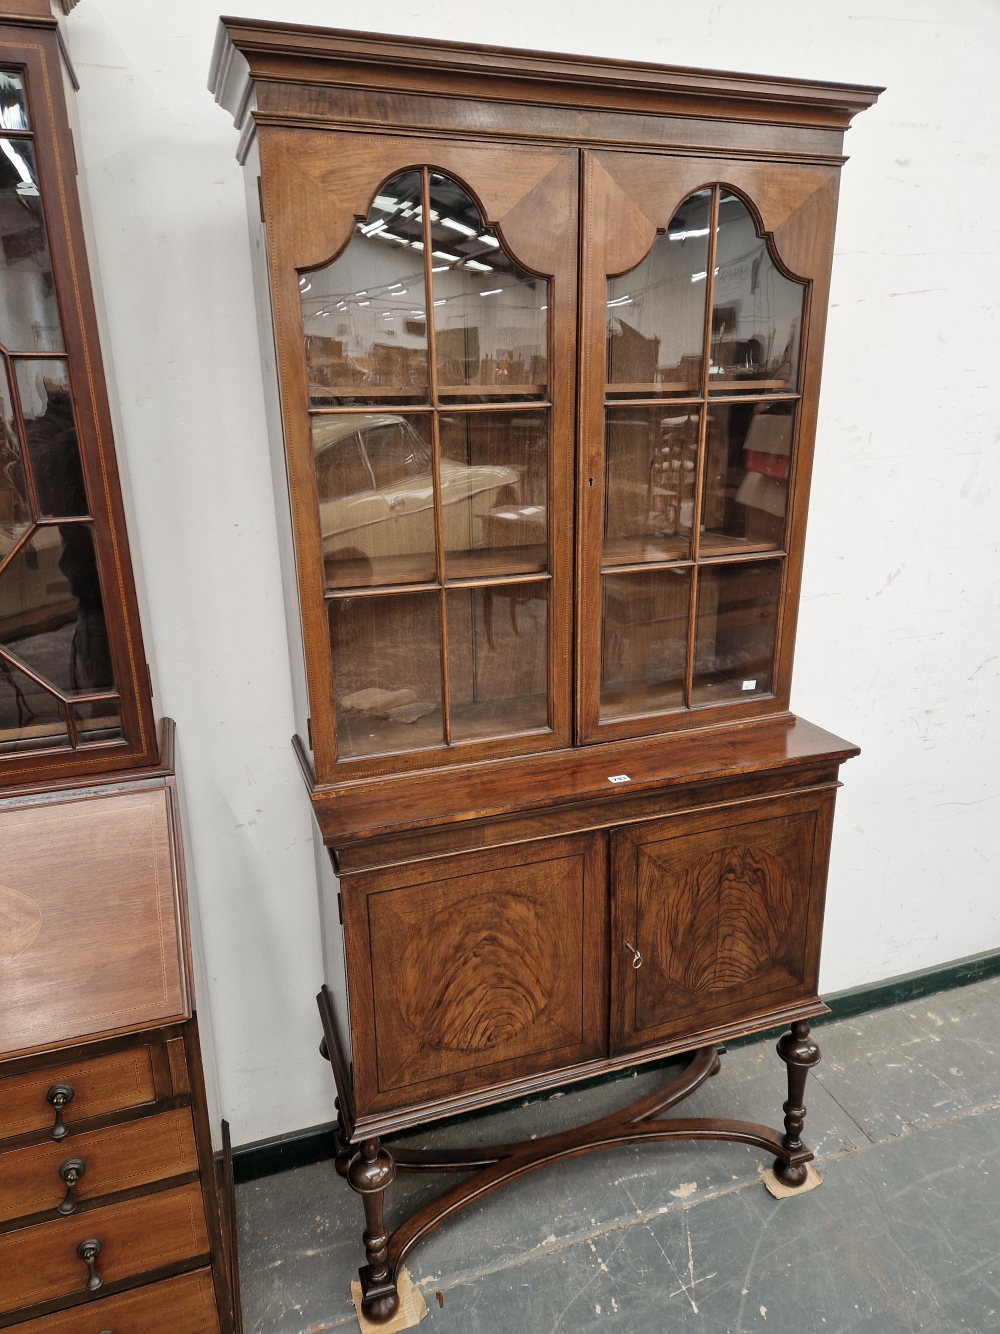 A 1920's WALNUT GLAZED CABINET ON A TWO DOOR BASE WITH BARBERS POLE LINE INLAY, THE TURNED